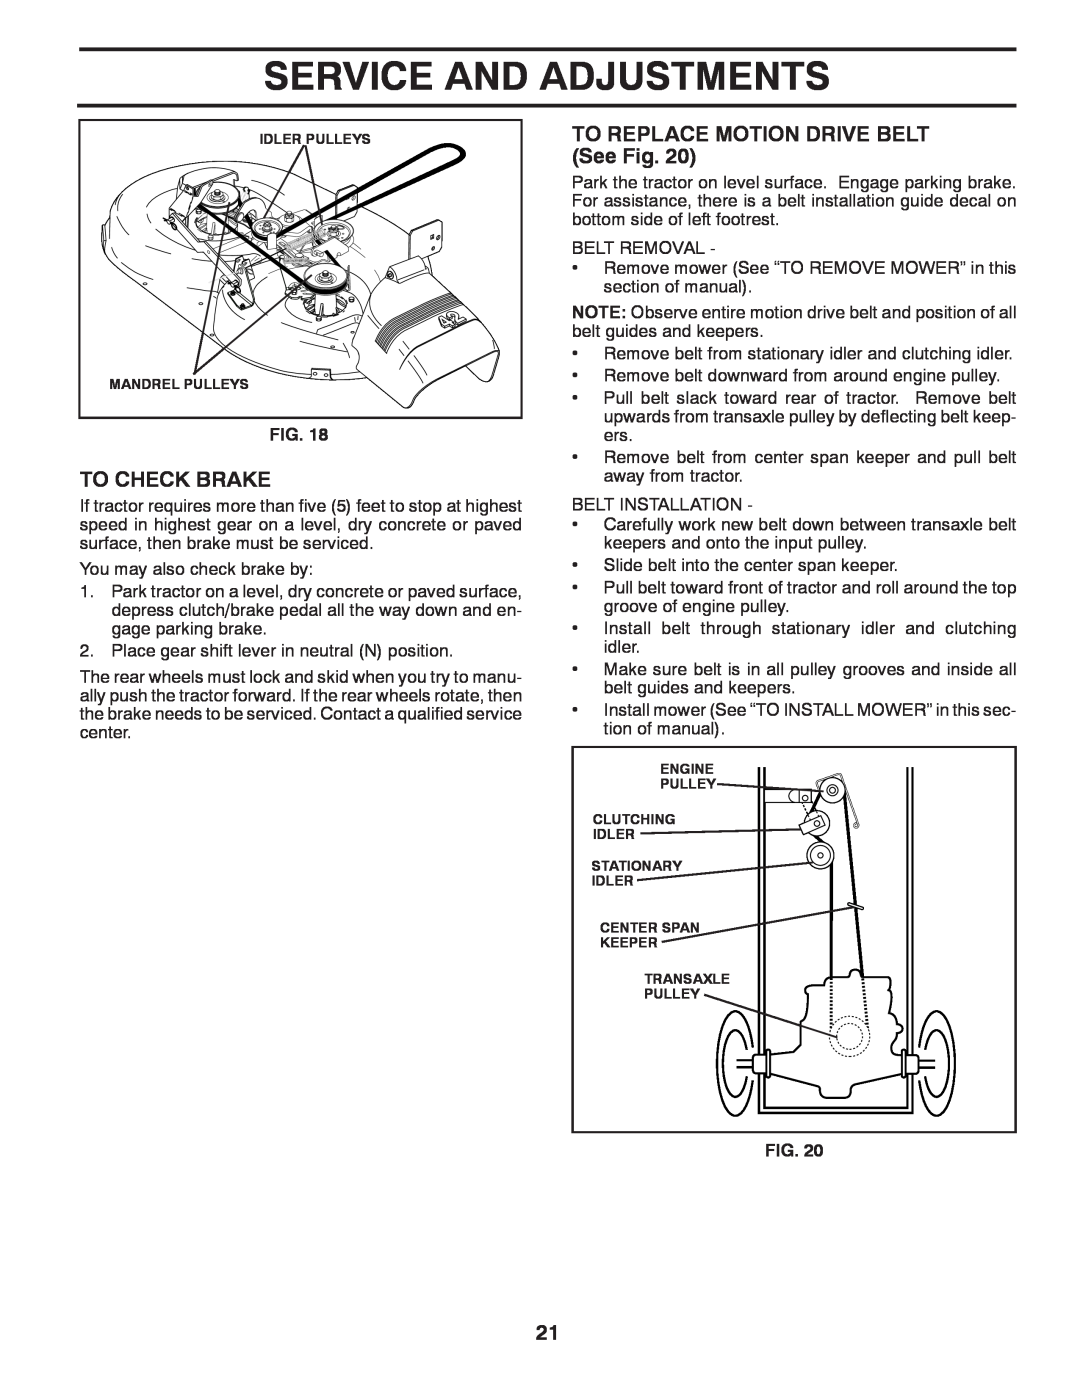 Poulan 418745, 96012008300 To Check Brake, TO REPLACE MOTION DRIVE BELT See Fig, Service And Adjustments, Idler Pulleys 